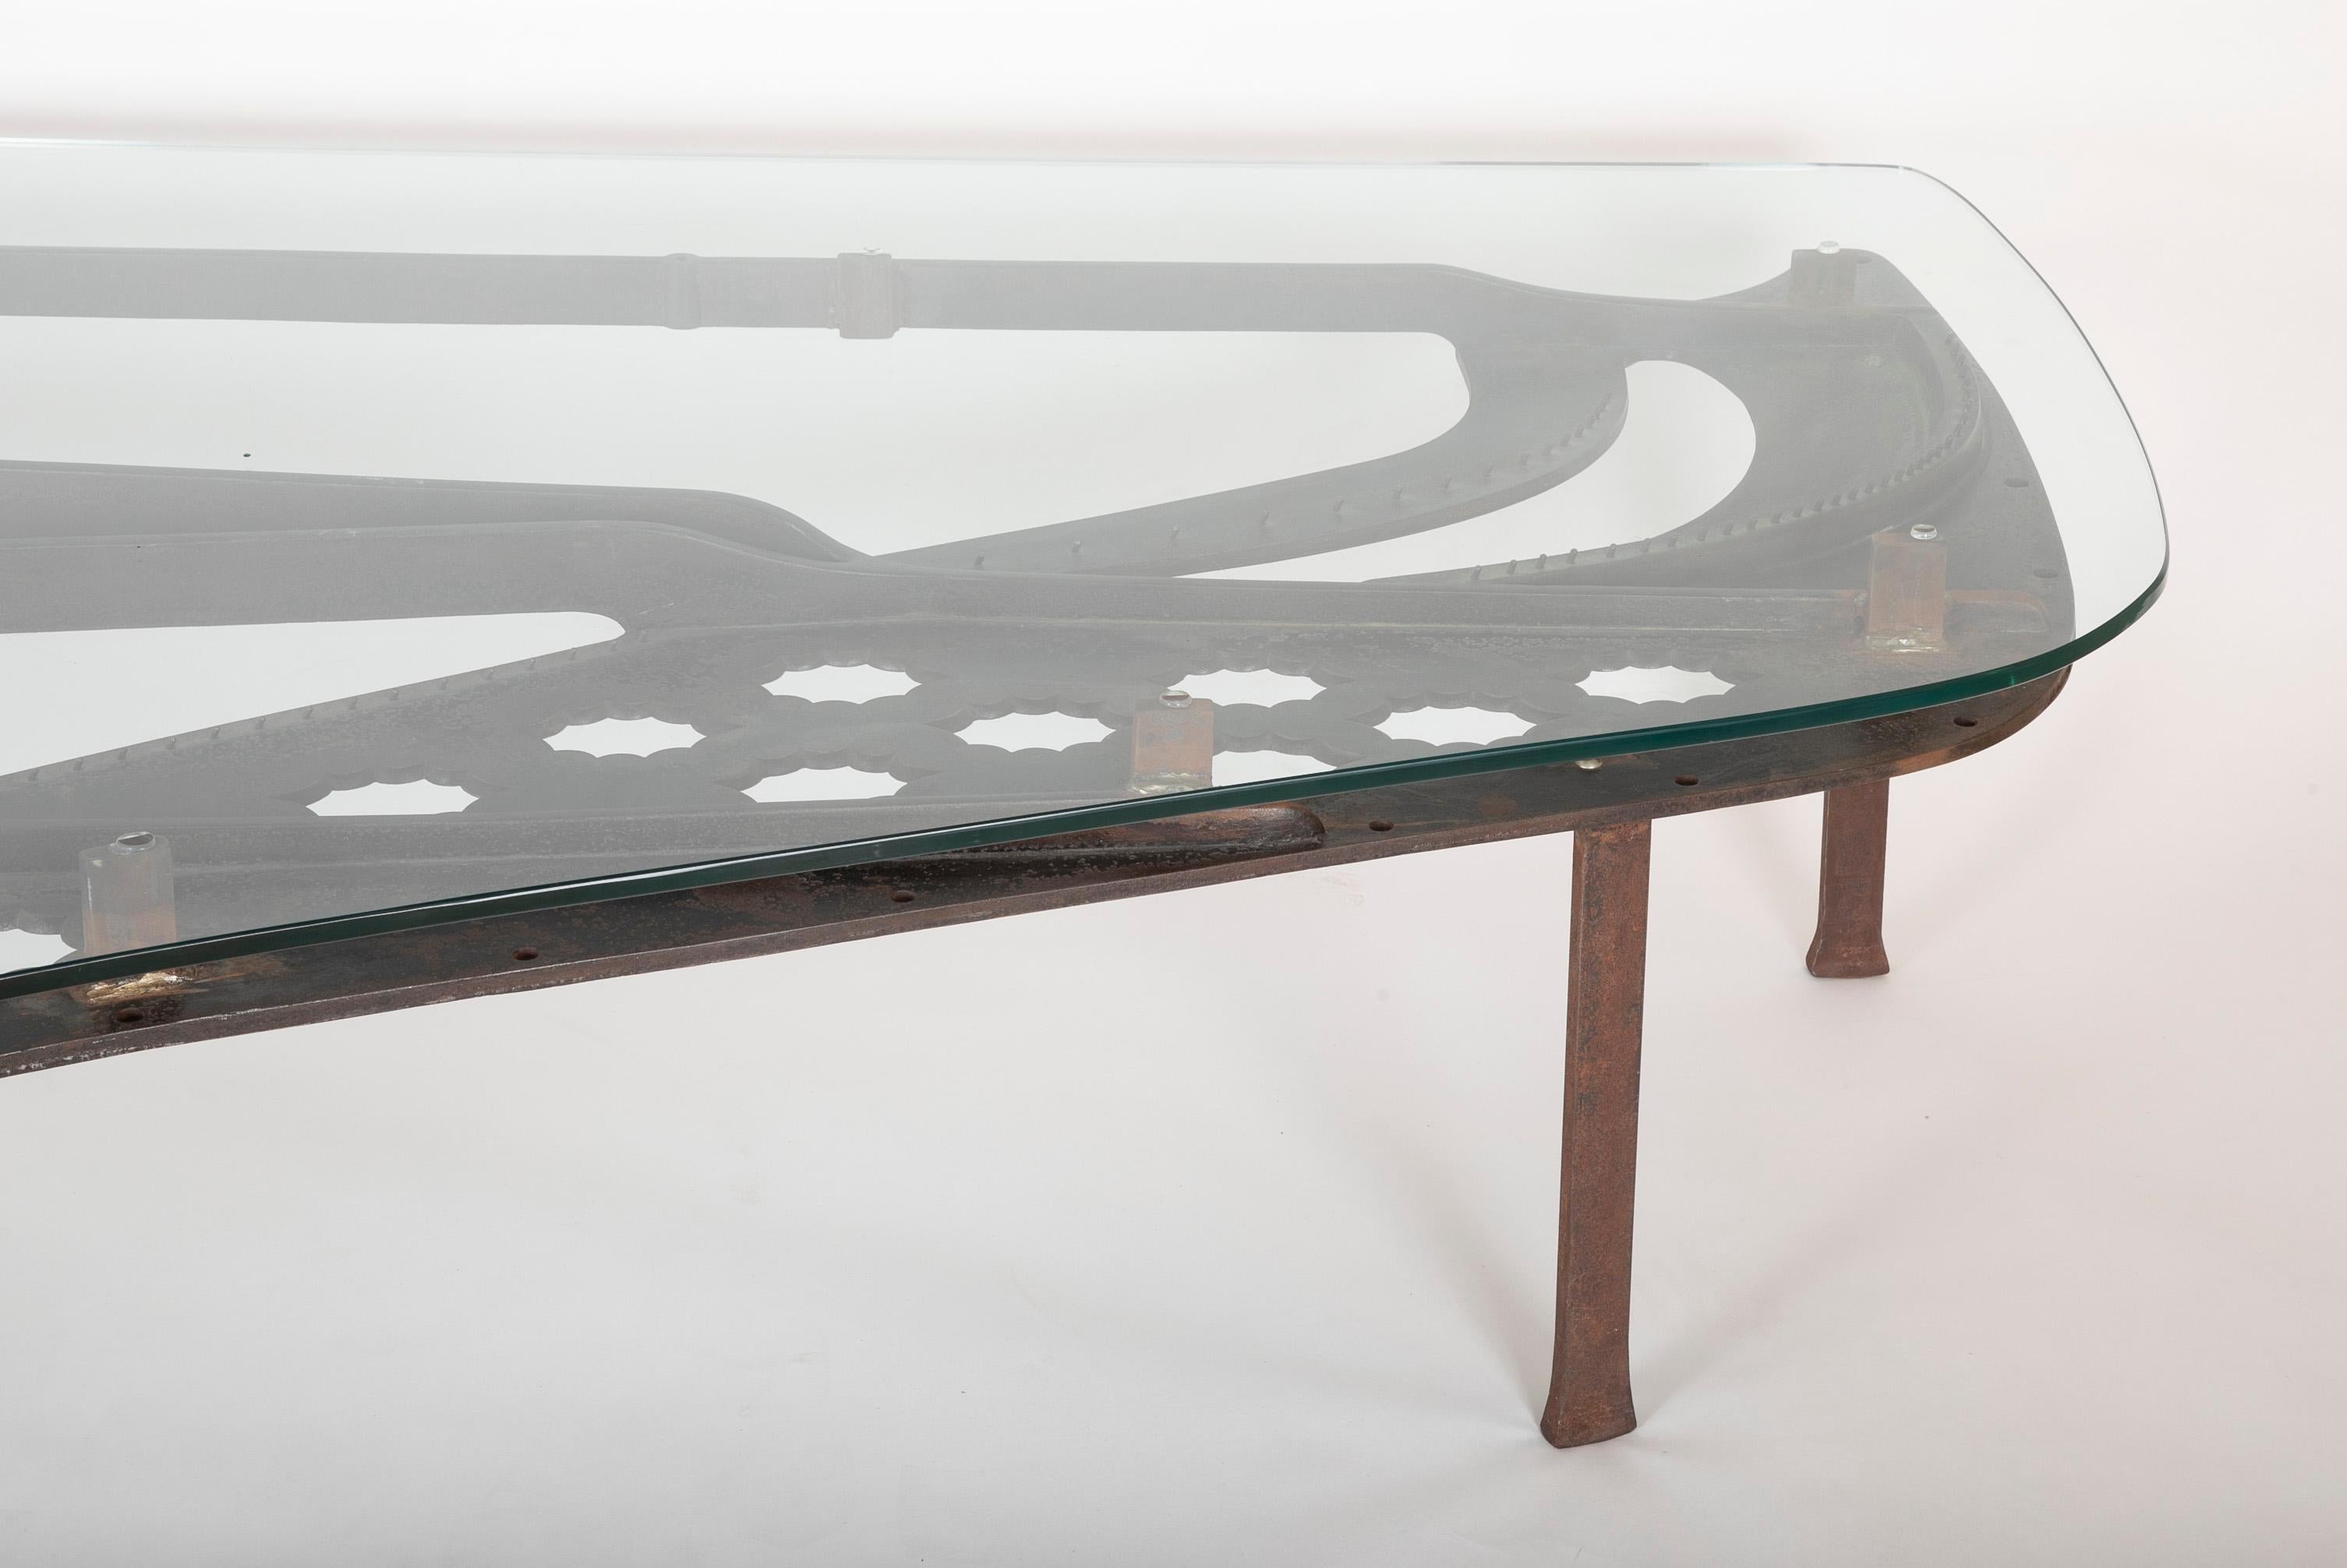 19th Century Antique Steinway Cast Iron Piano Frame Model a Grand Piano Now a Coffee Table For Sale